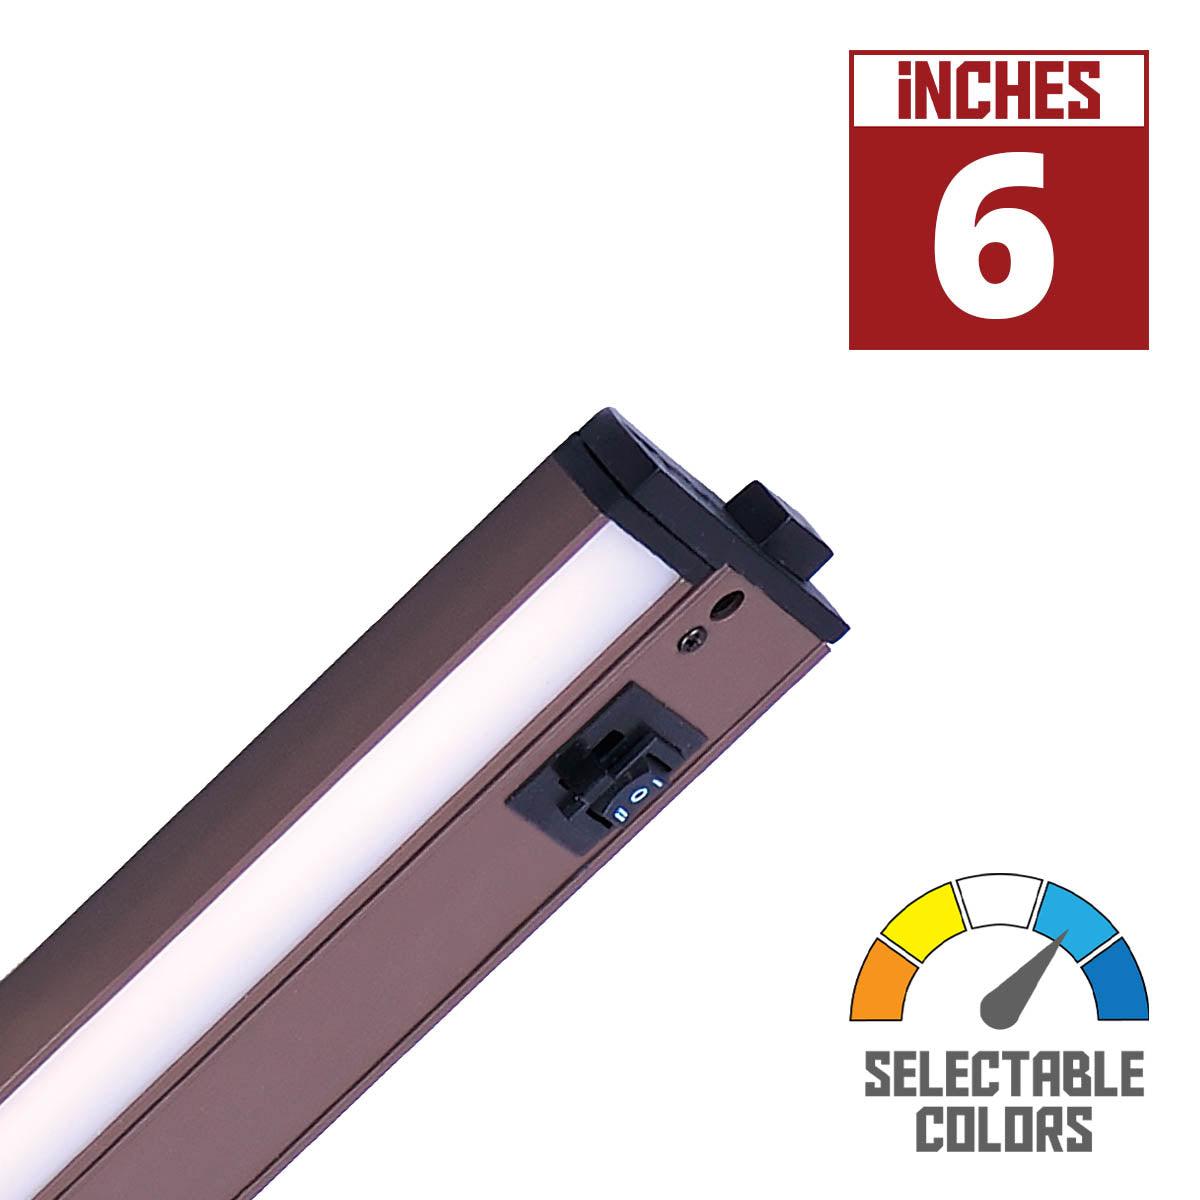 CounterMax 5K 6 Inch Under Cabinet LED Light with Patent gimbals, 360 Lumens, Linkable, CCT Selectable 2700K to 5000K, 120V - Bees Lighting